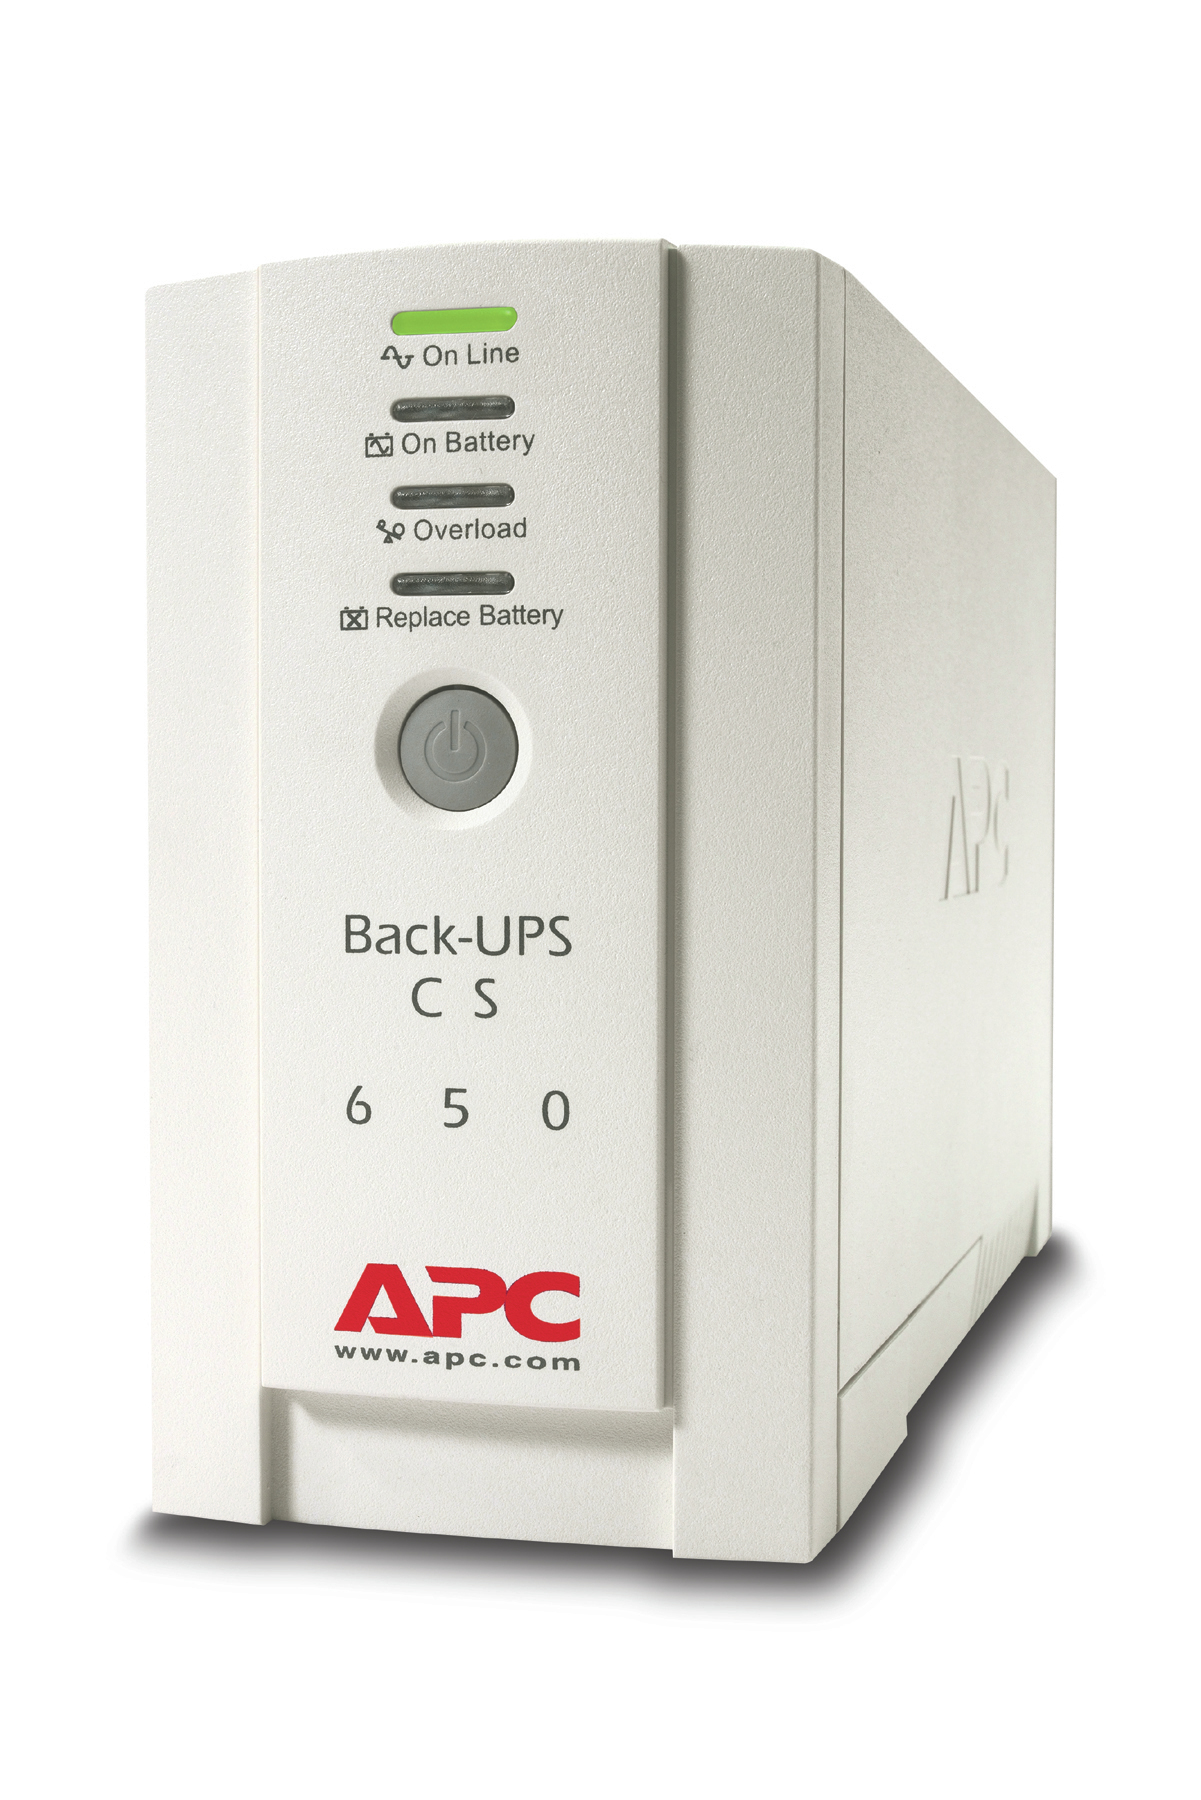 APC Back-UPS uninterruptible power supply (UPS) Standby (Offline) 0.65 kVA 400 W 4 AC outlet(s)